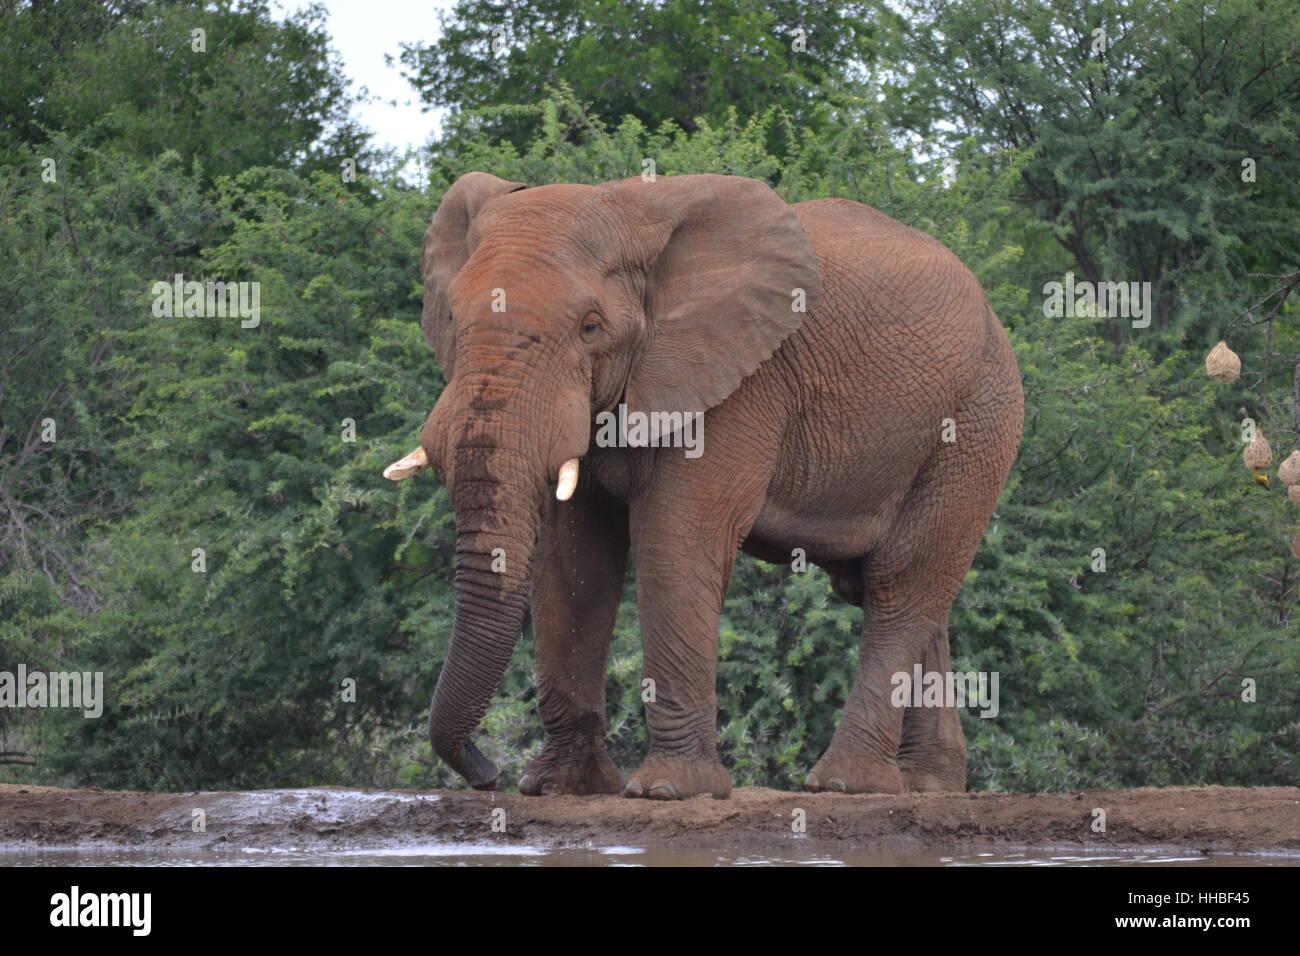 South African Elephant Stockfoto